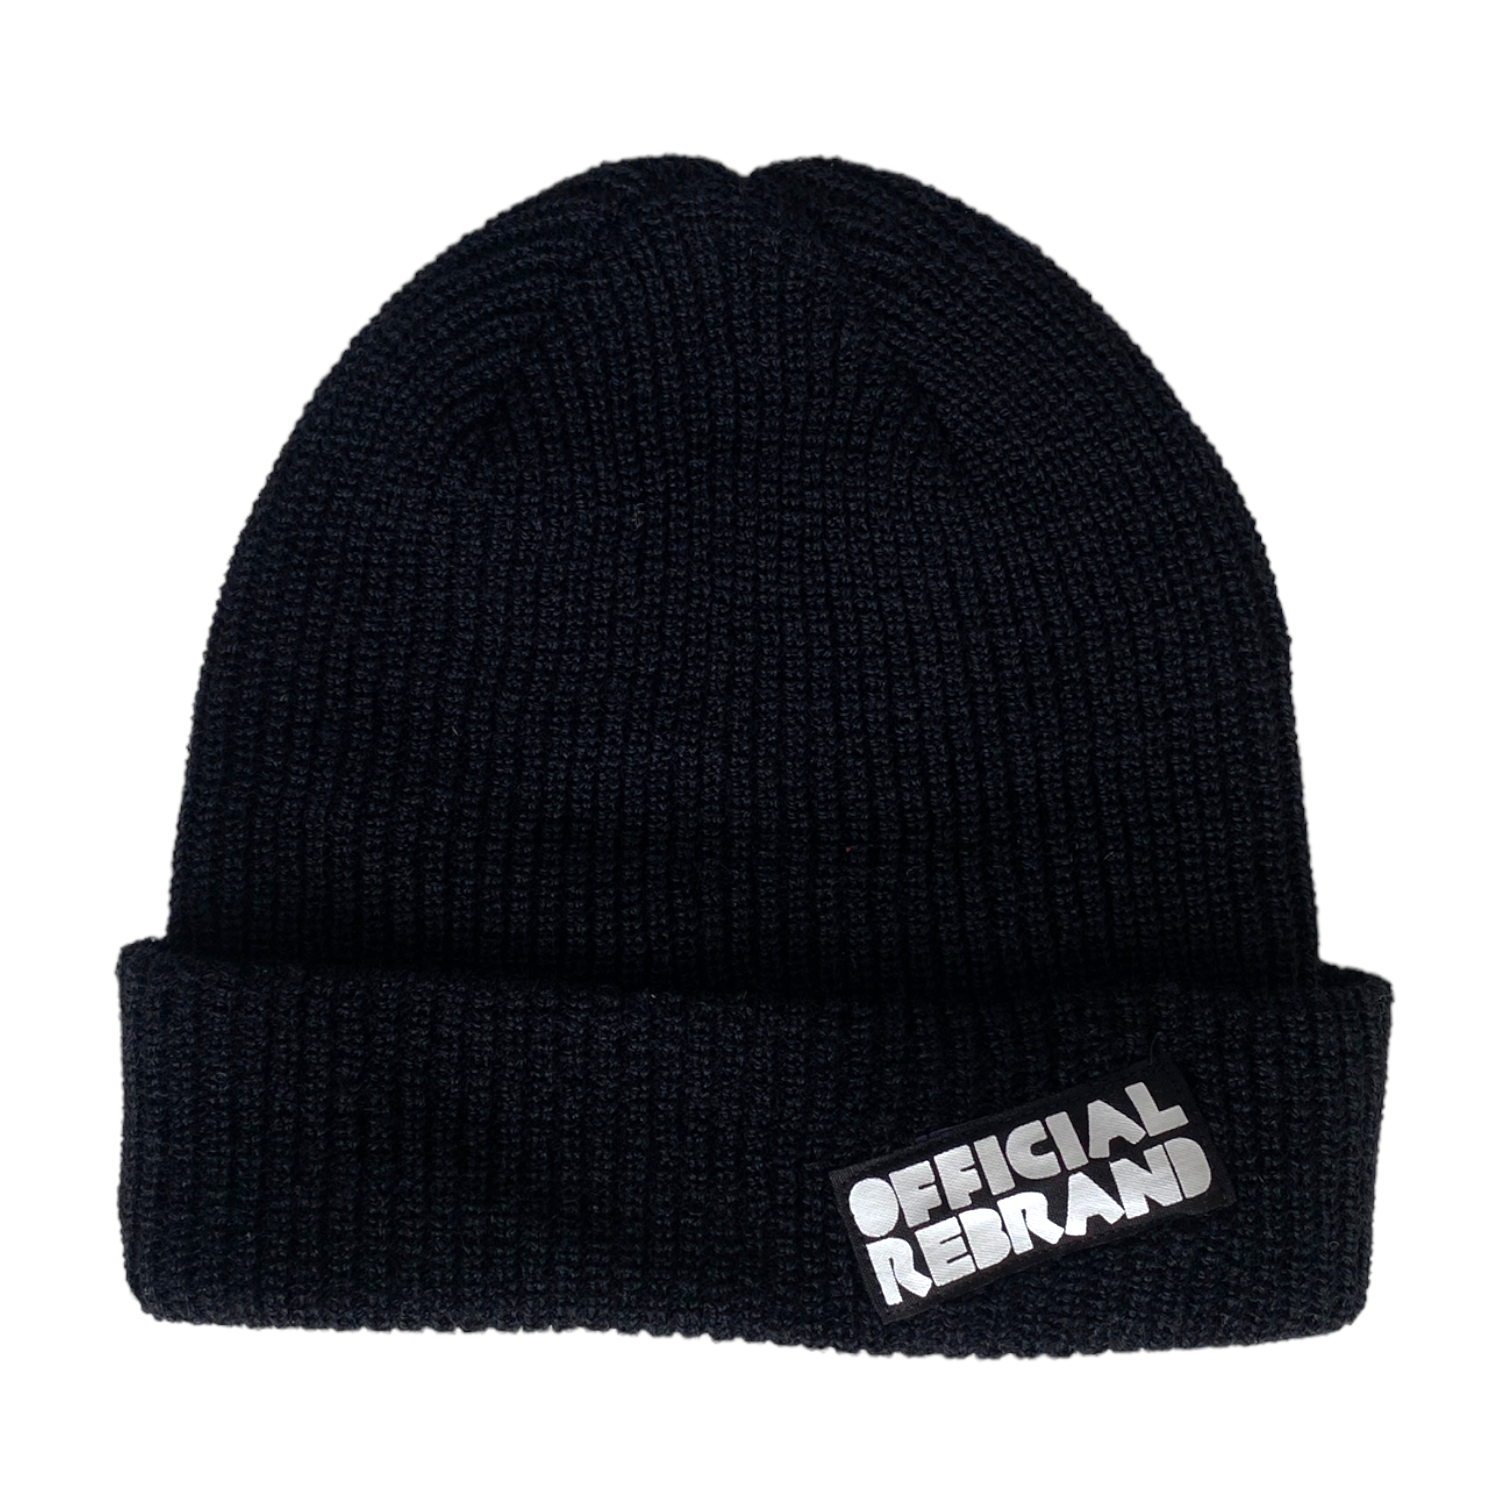 back of black wool beanie with tag reading OFFICIAL REBRAND in white